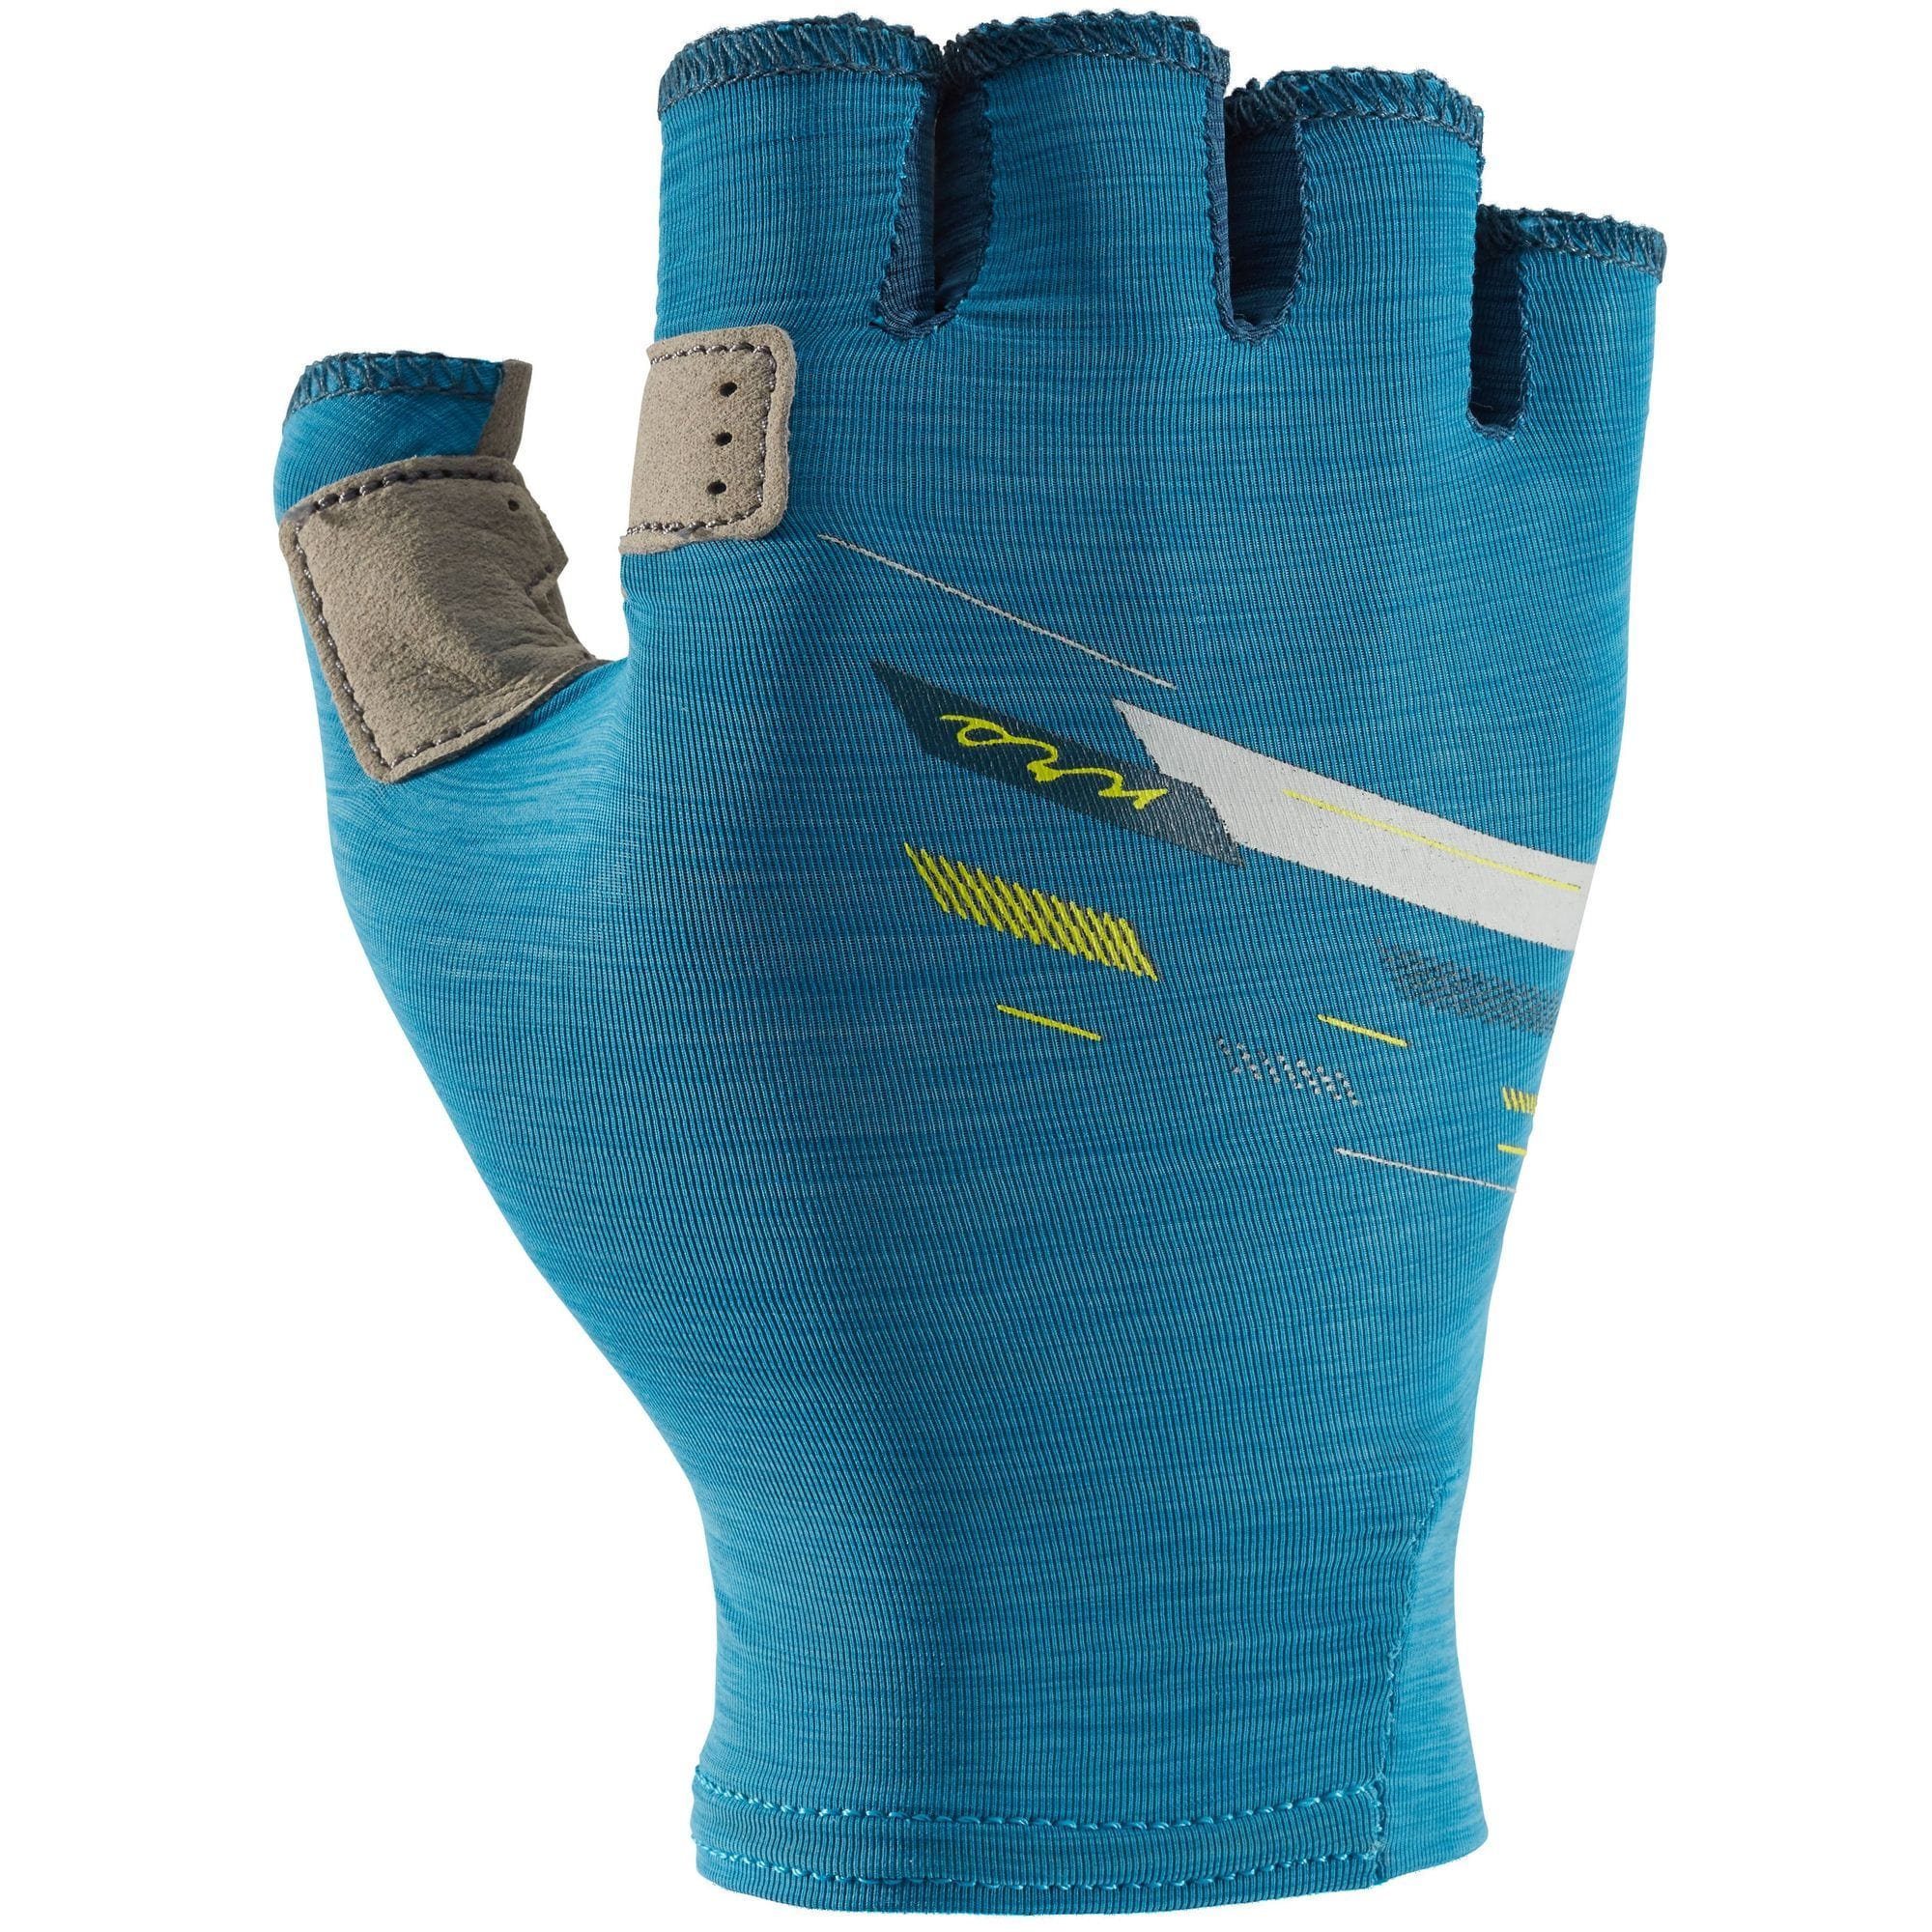 NRS Women's Boater's Gloves XS